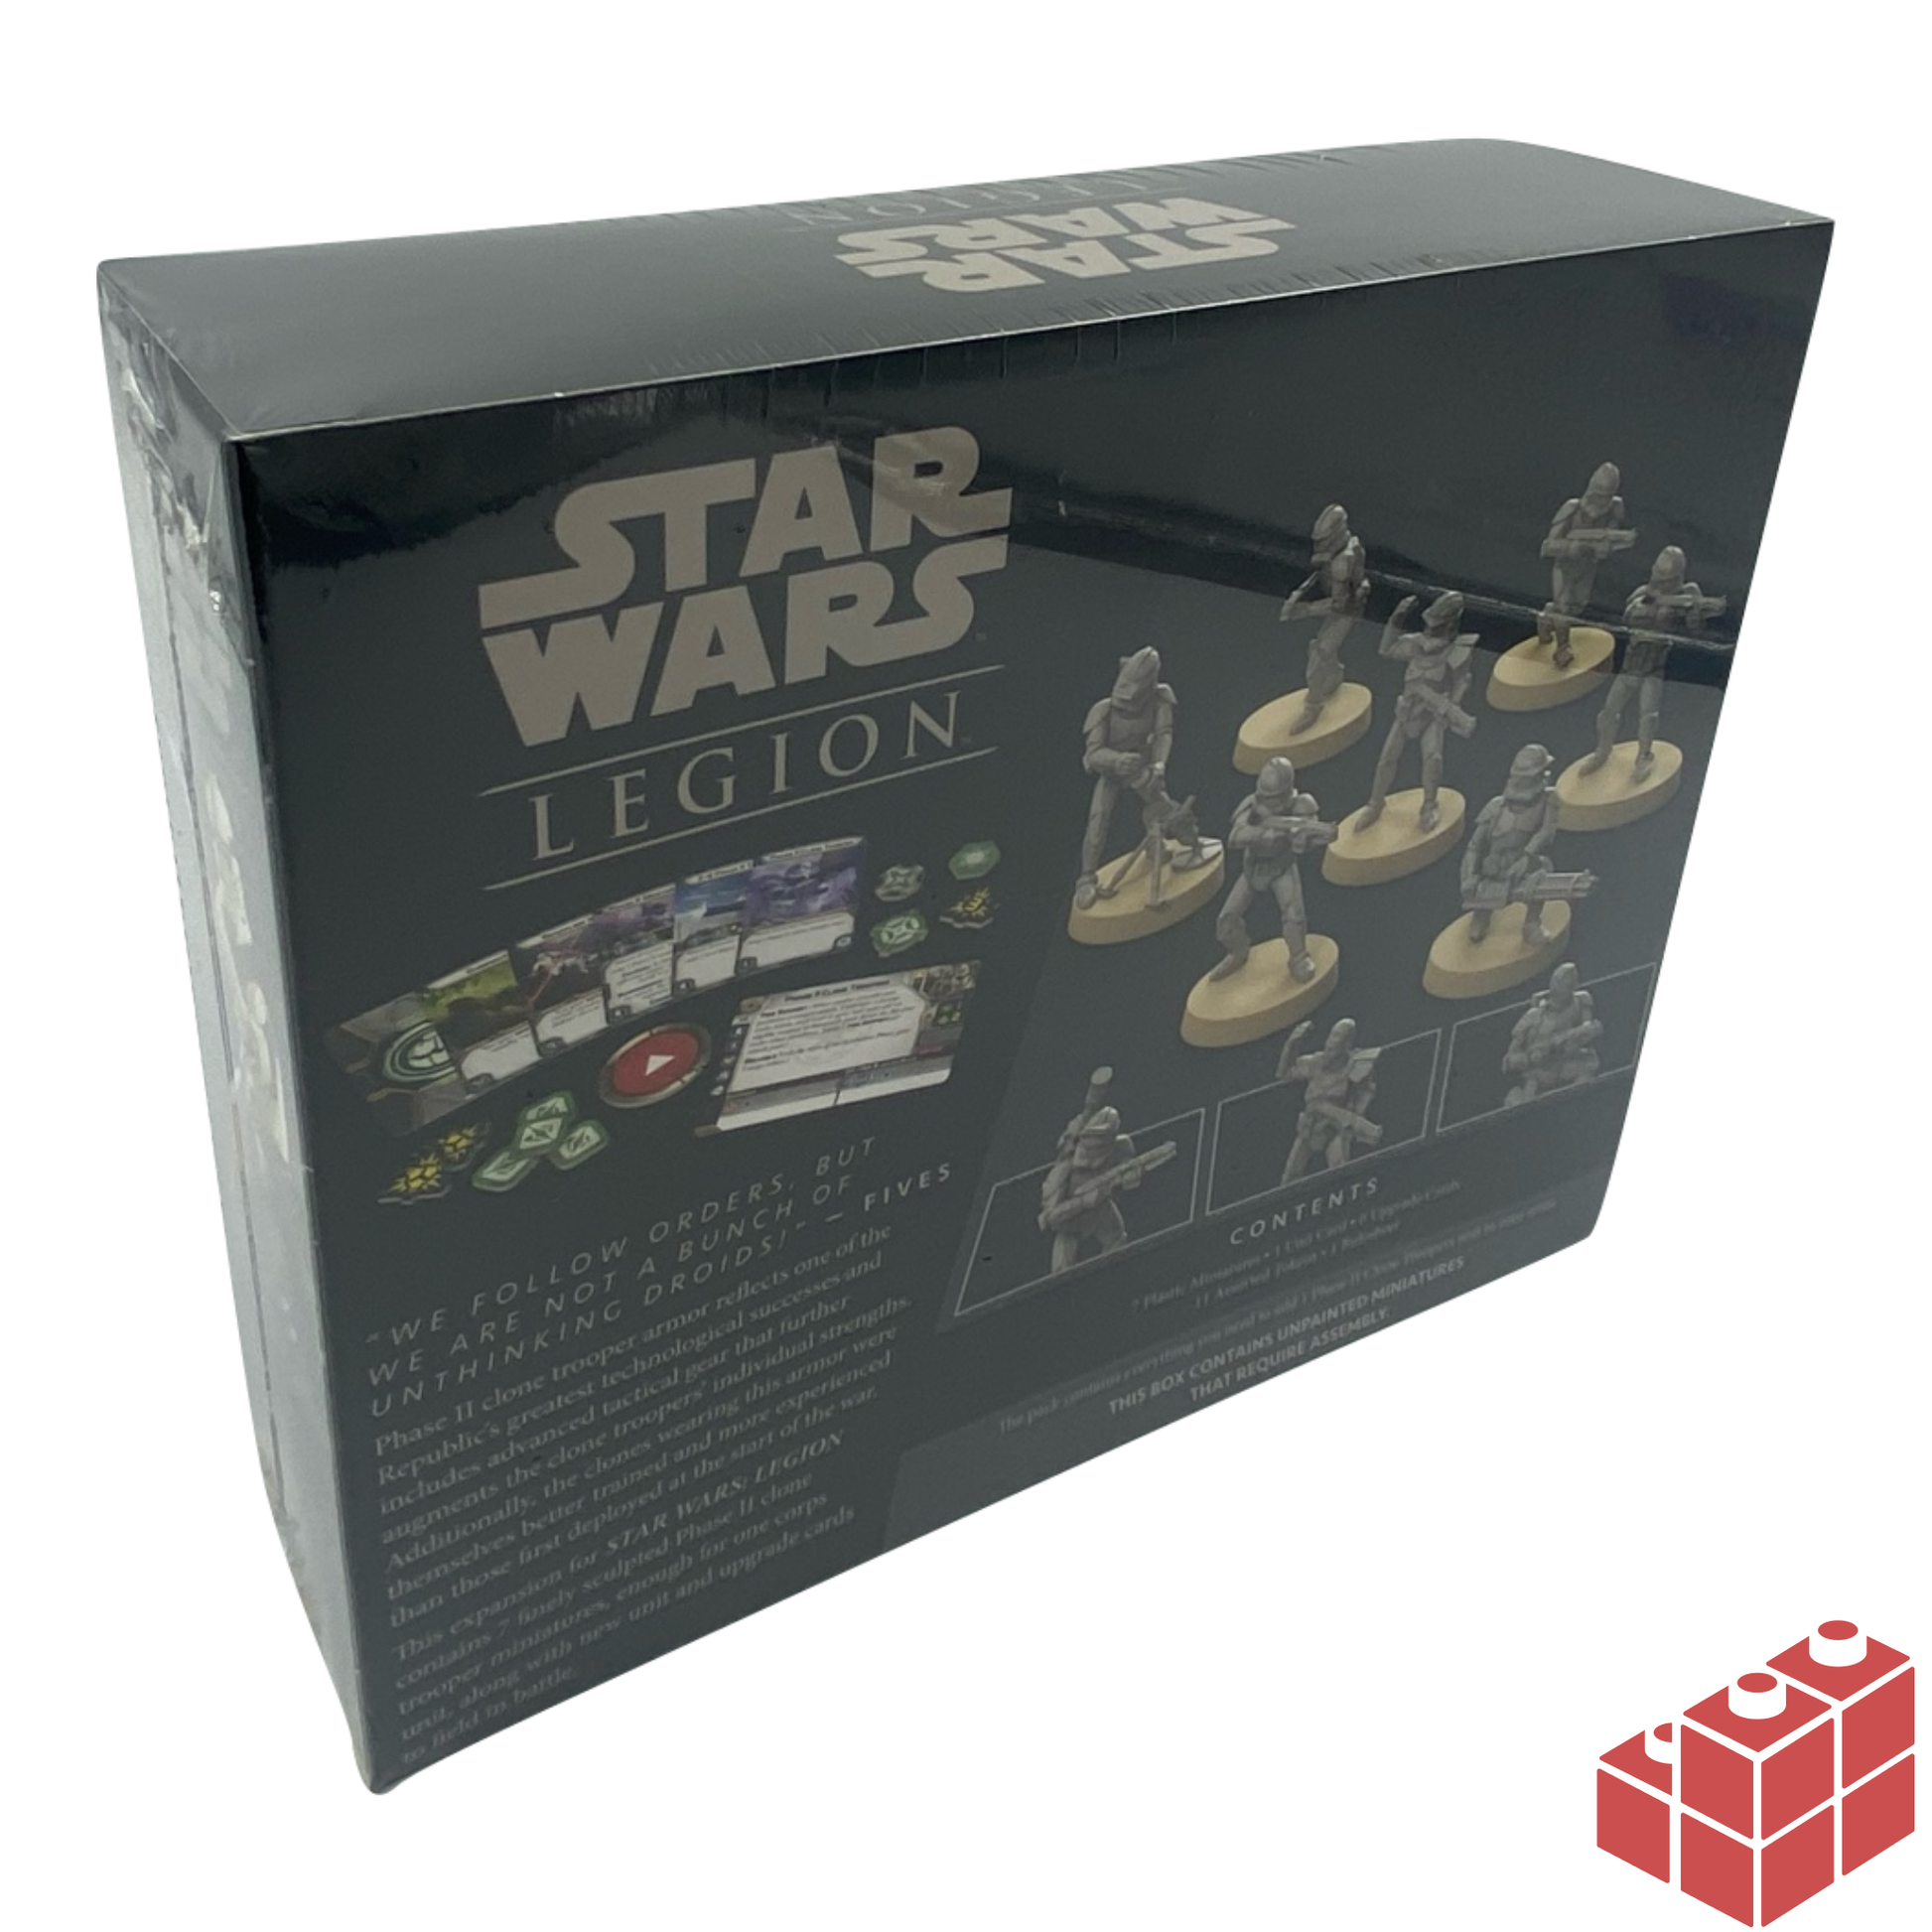 Star Wars: Legion - Phase II Clone Troopers Unit Expansion 